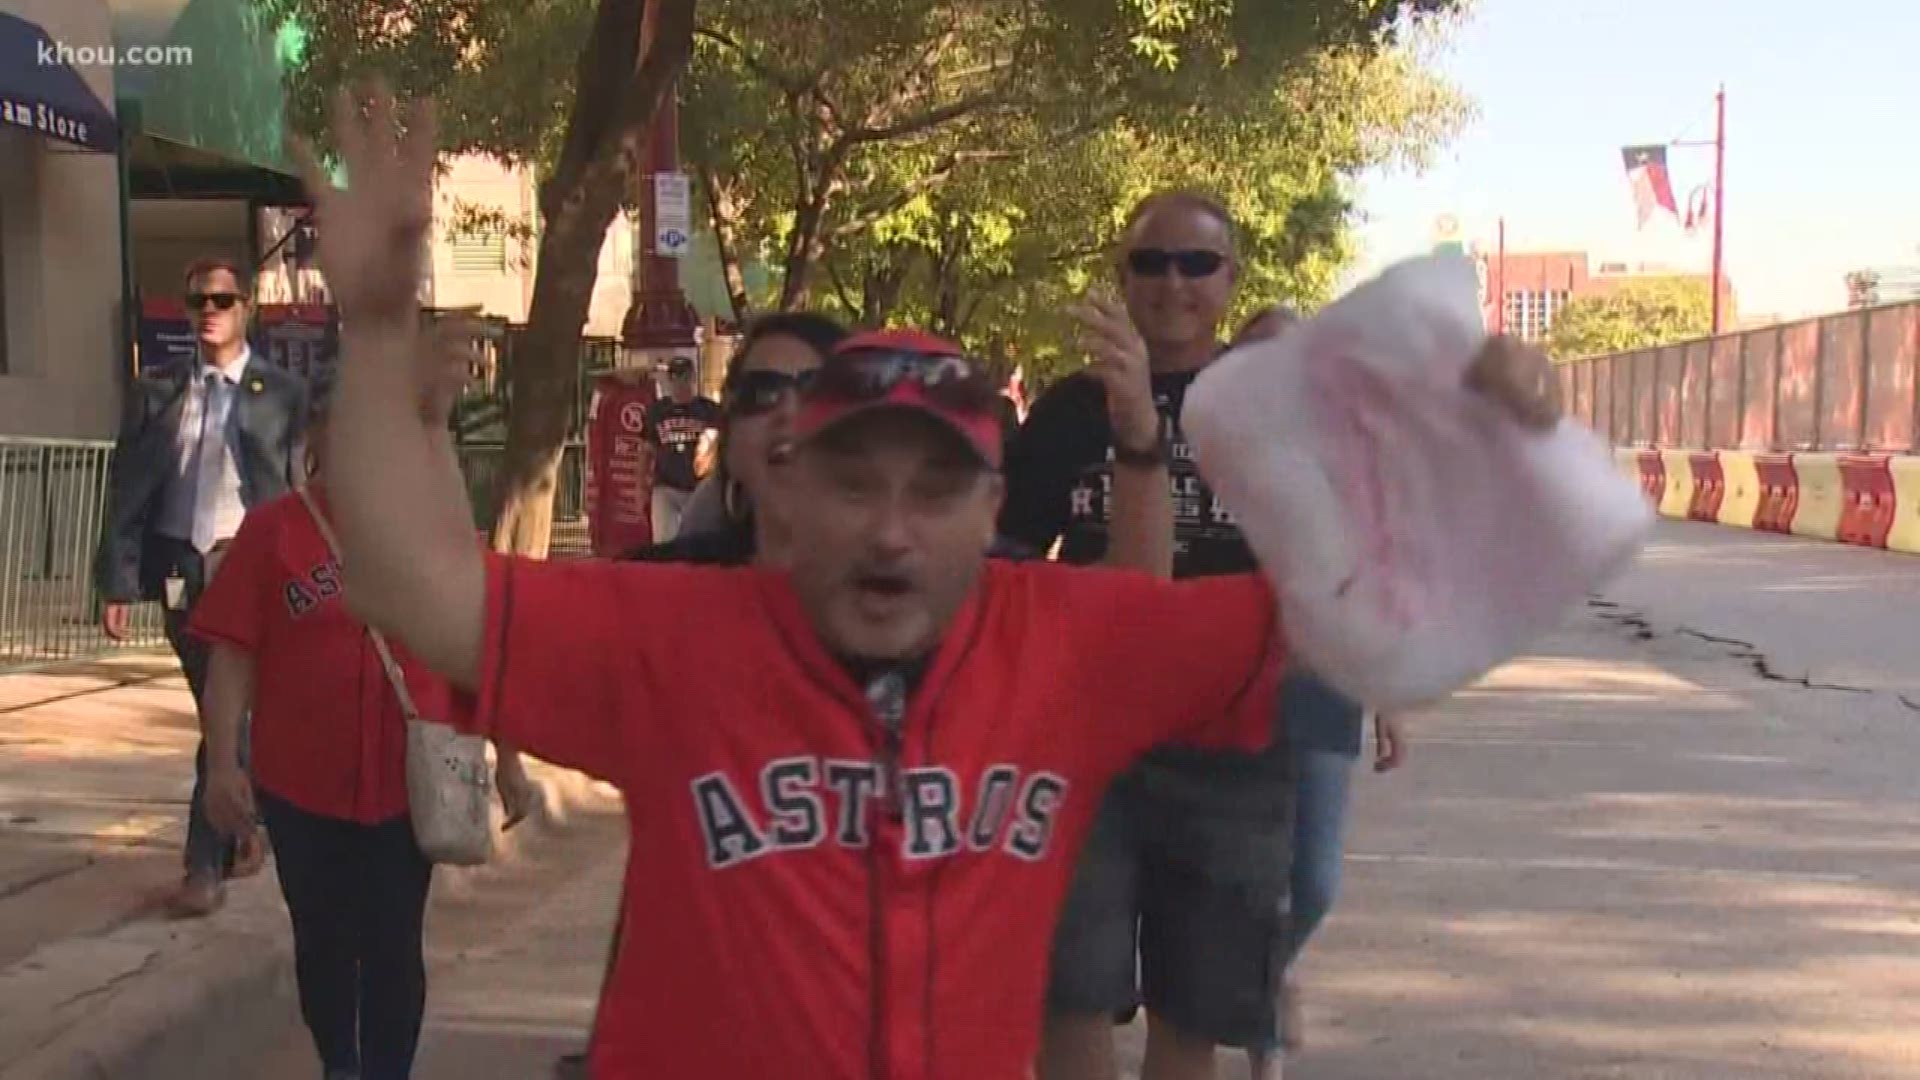 Houston Astros fans were excited to cheer on the team against the New York Yankees during Game 1 of the ALCS.